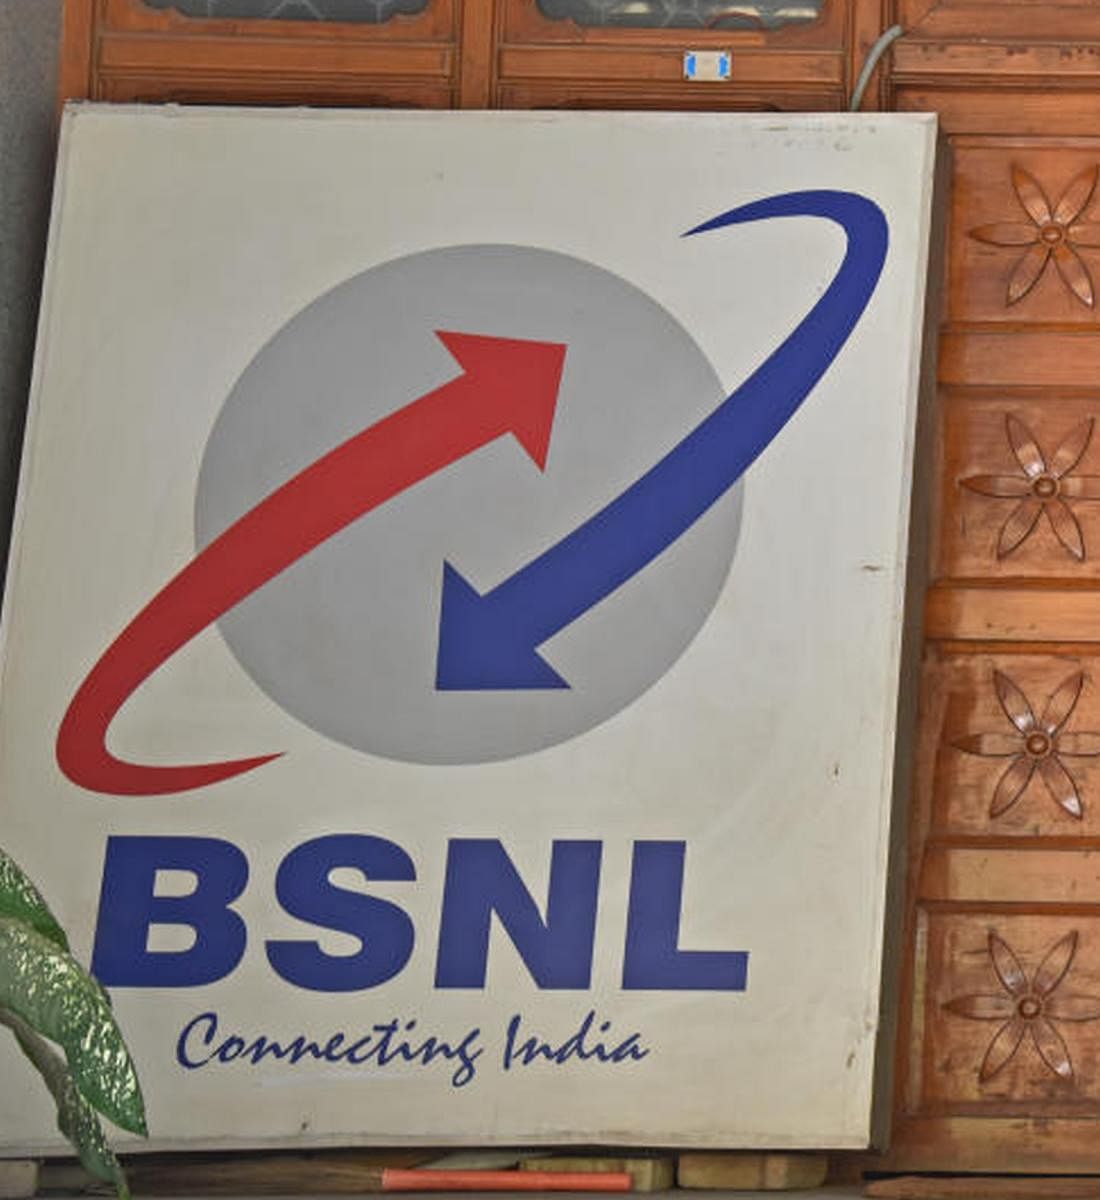 BSNL clears Rs 1,700cr in dues; pays Nov salaries: CMD